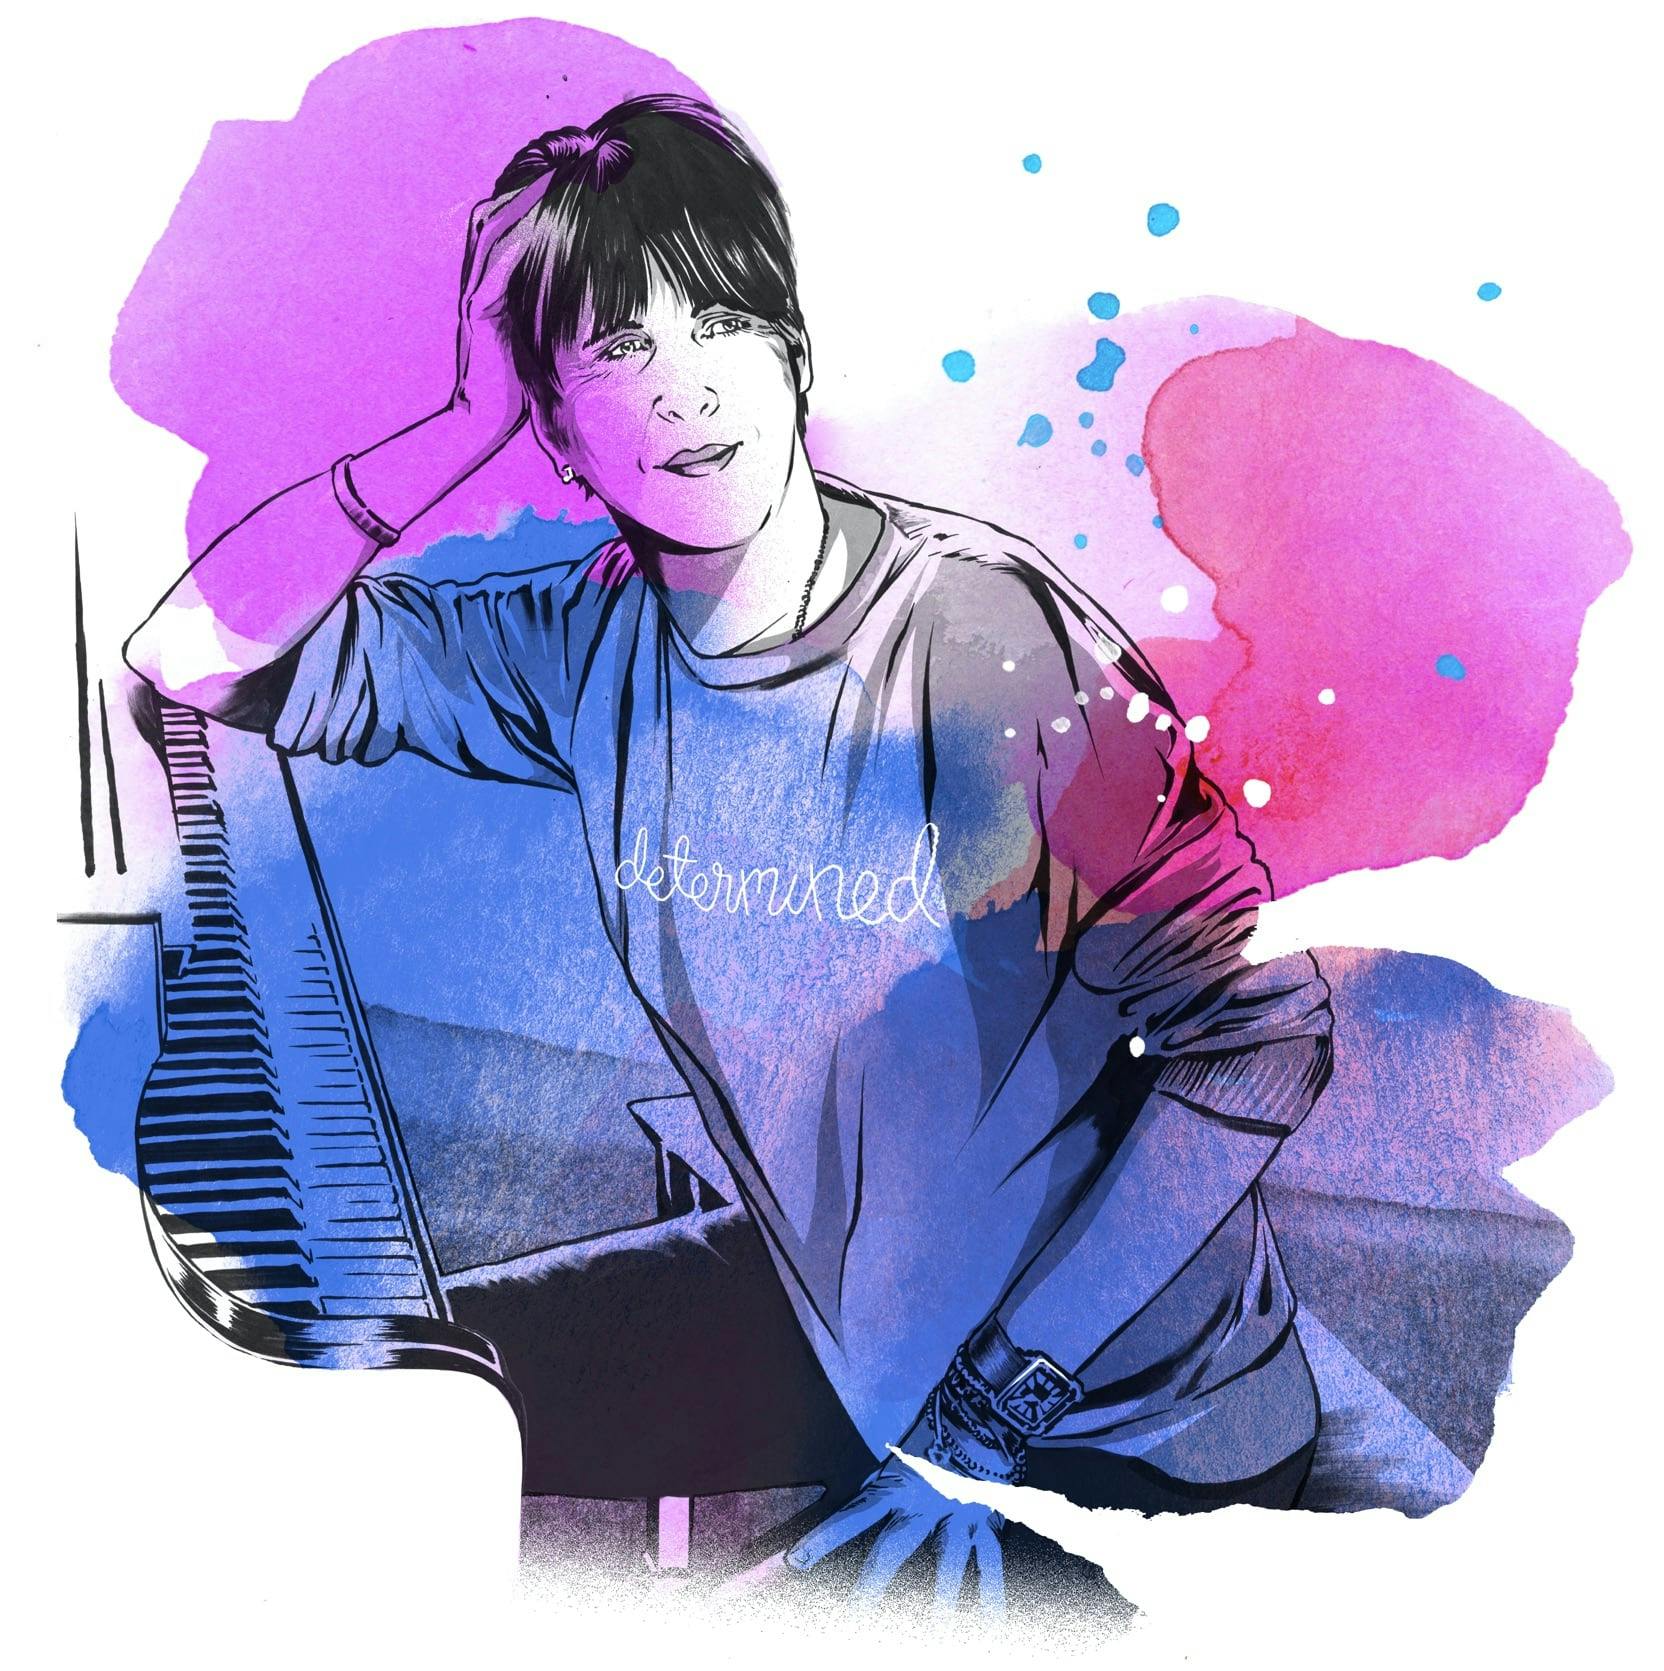 Pencil-sketch illustration of songwriter Diane Warren sitting at a piano, wearing a sweater that reads “determined.” Watercolor detail in pink, purple, and blue.